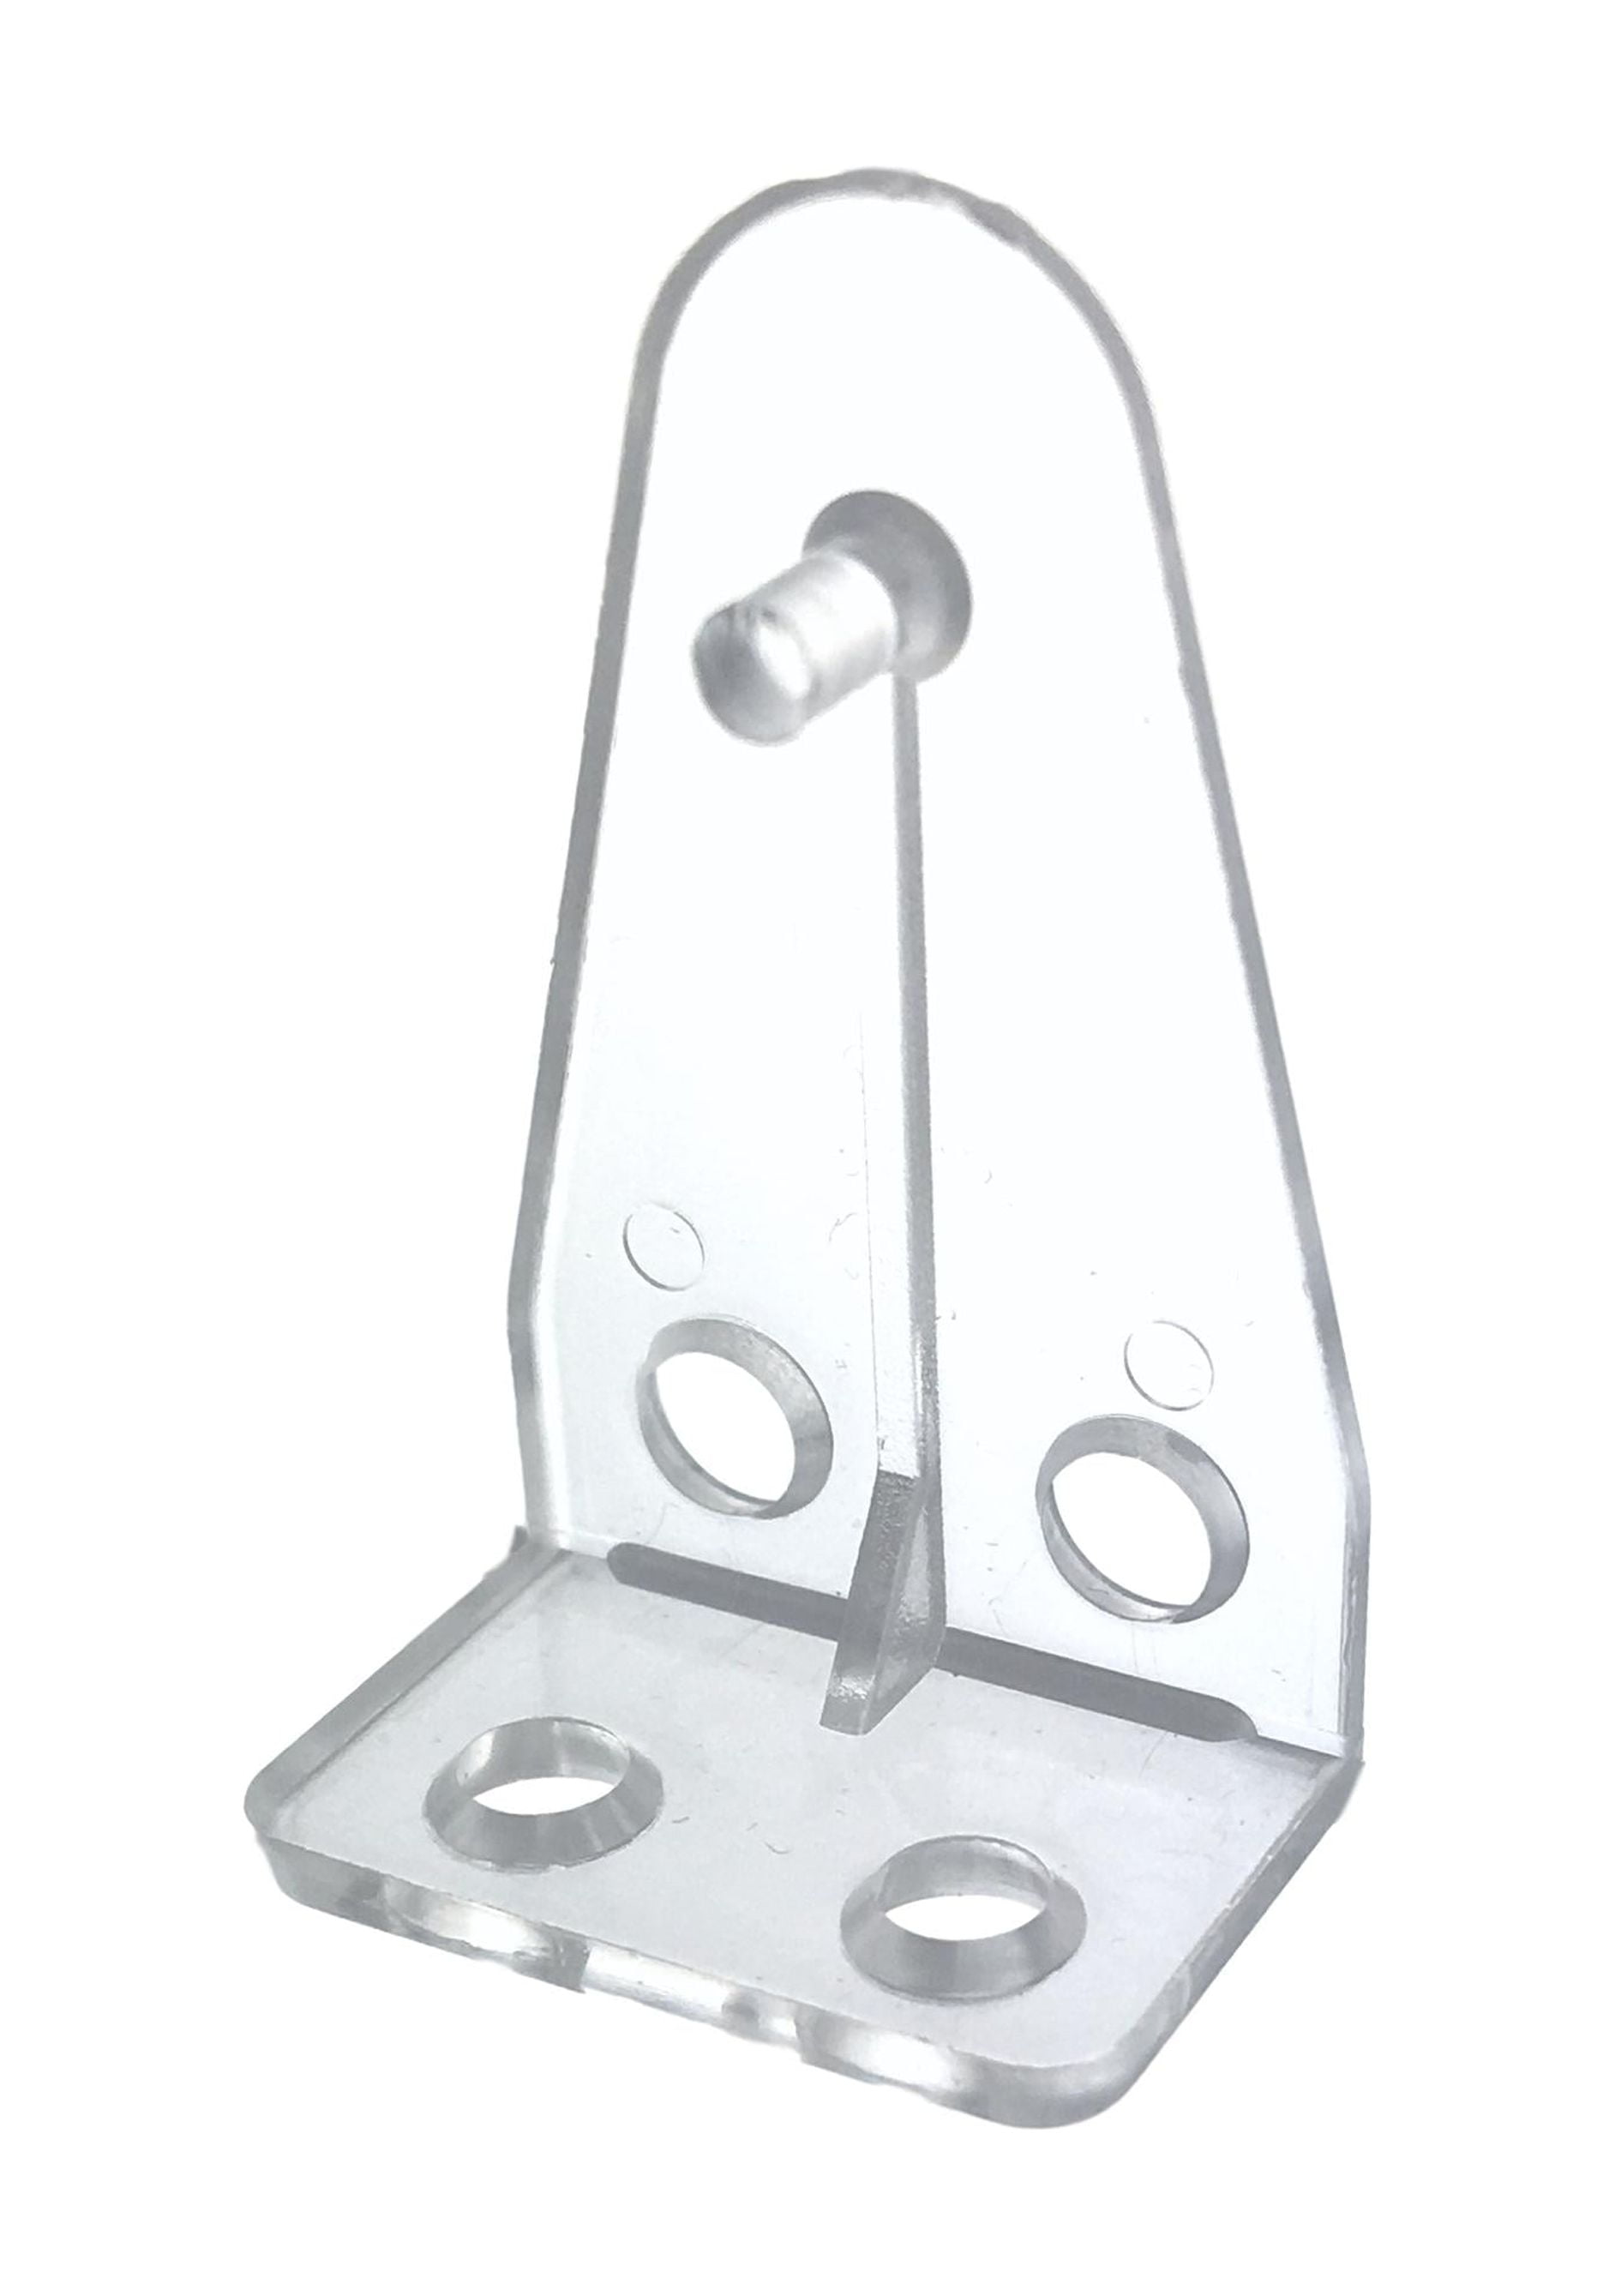 Hold Down Bracket for 1 inch Mini Blinds or Cellular Shades Clear